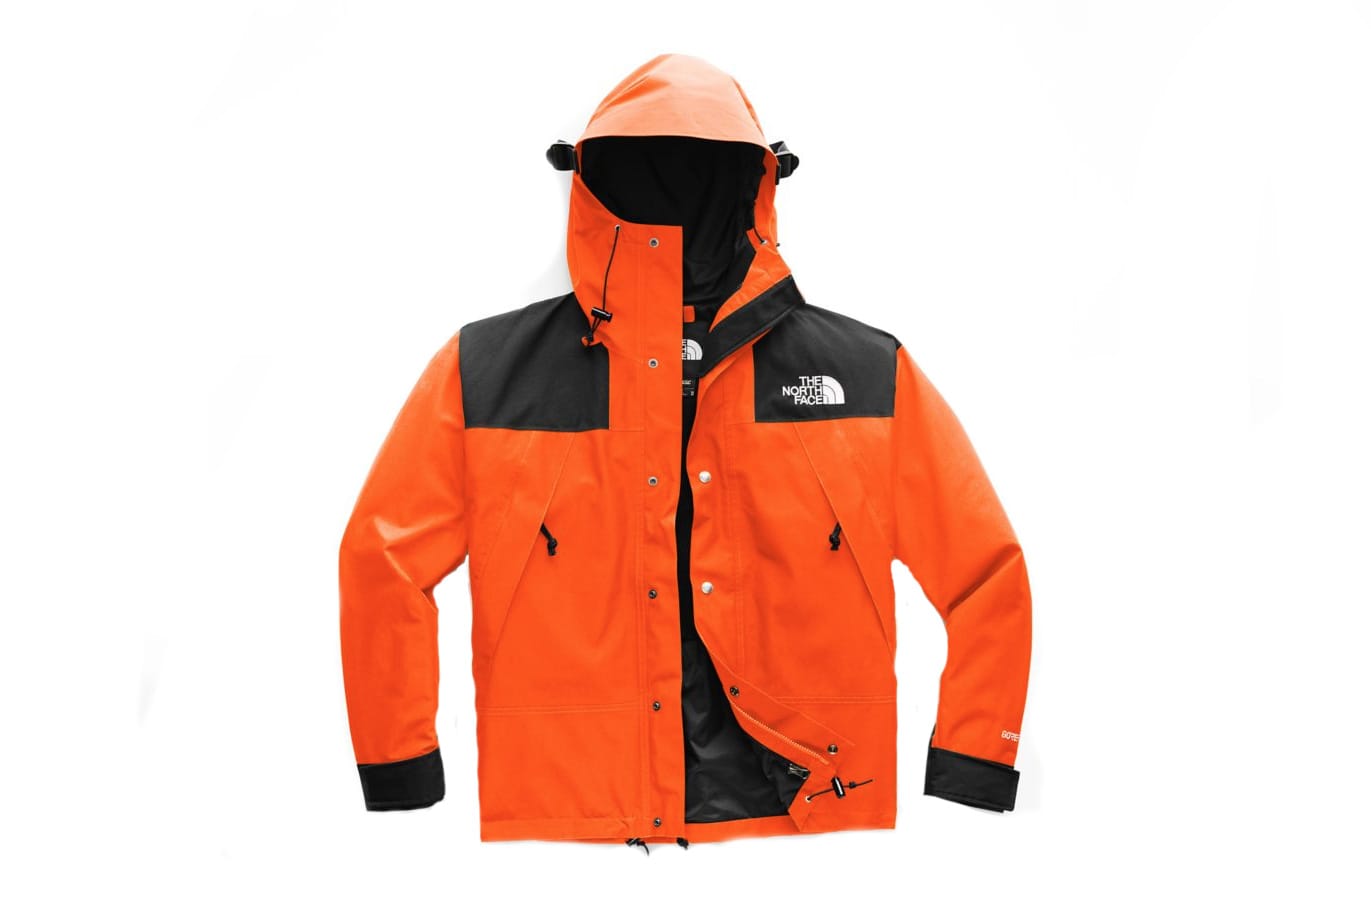 new the north face jacket